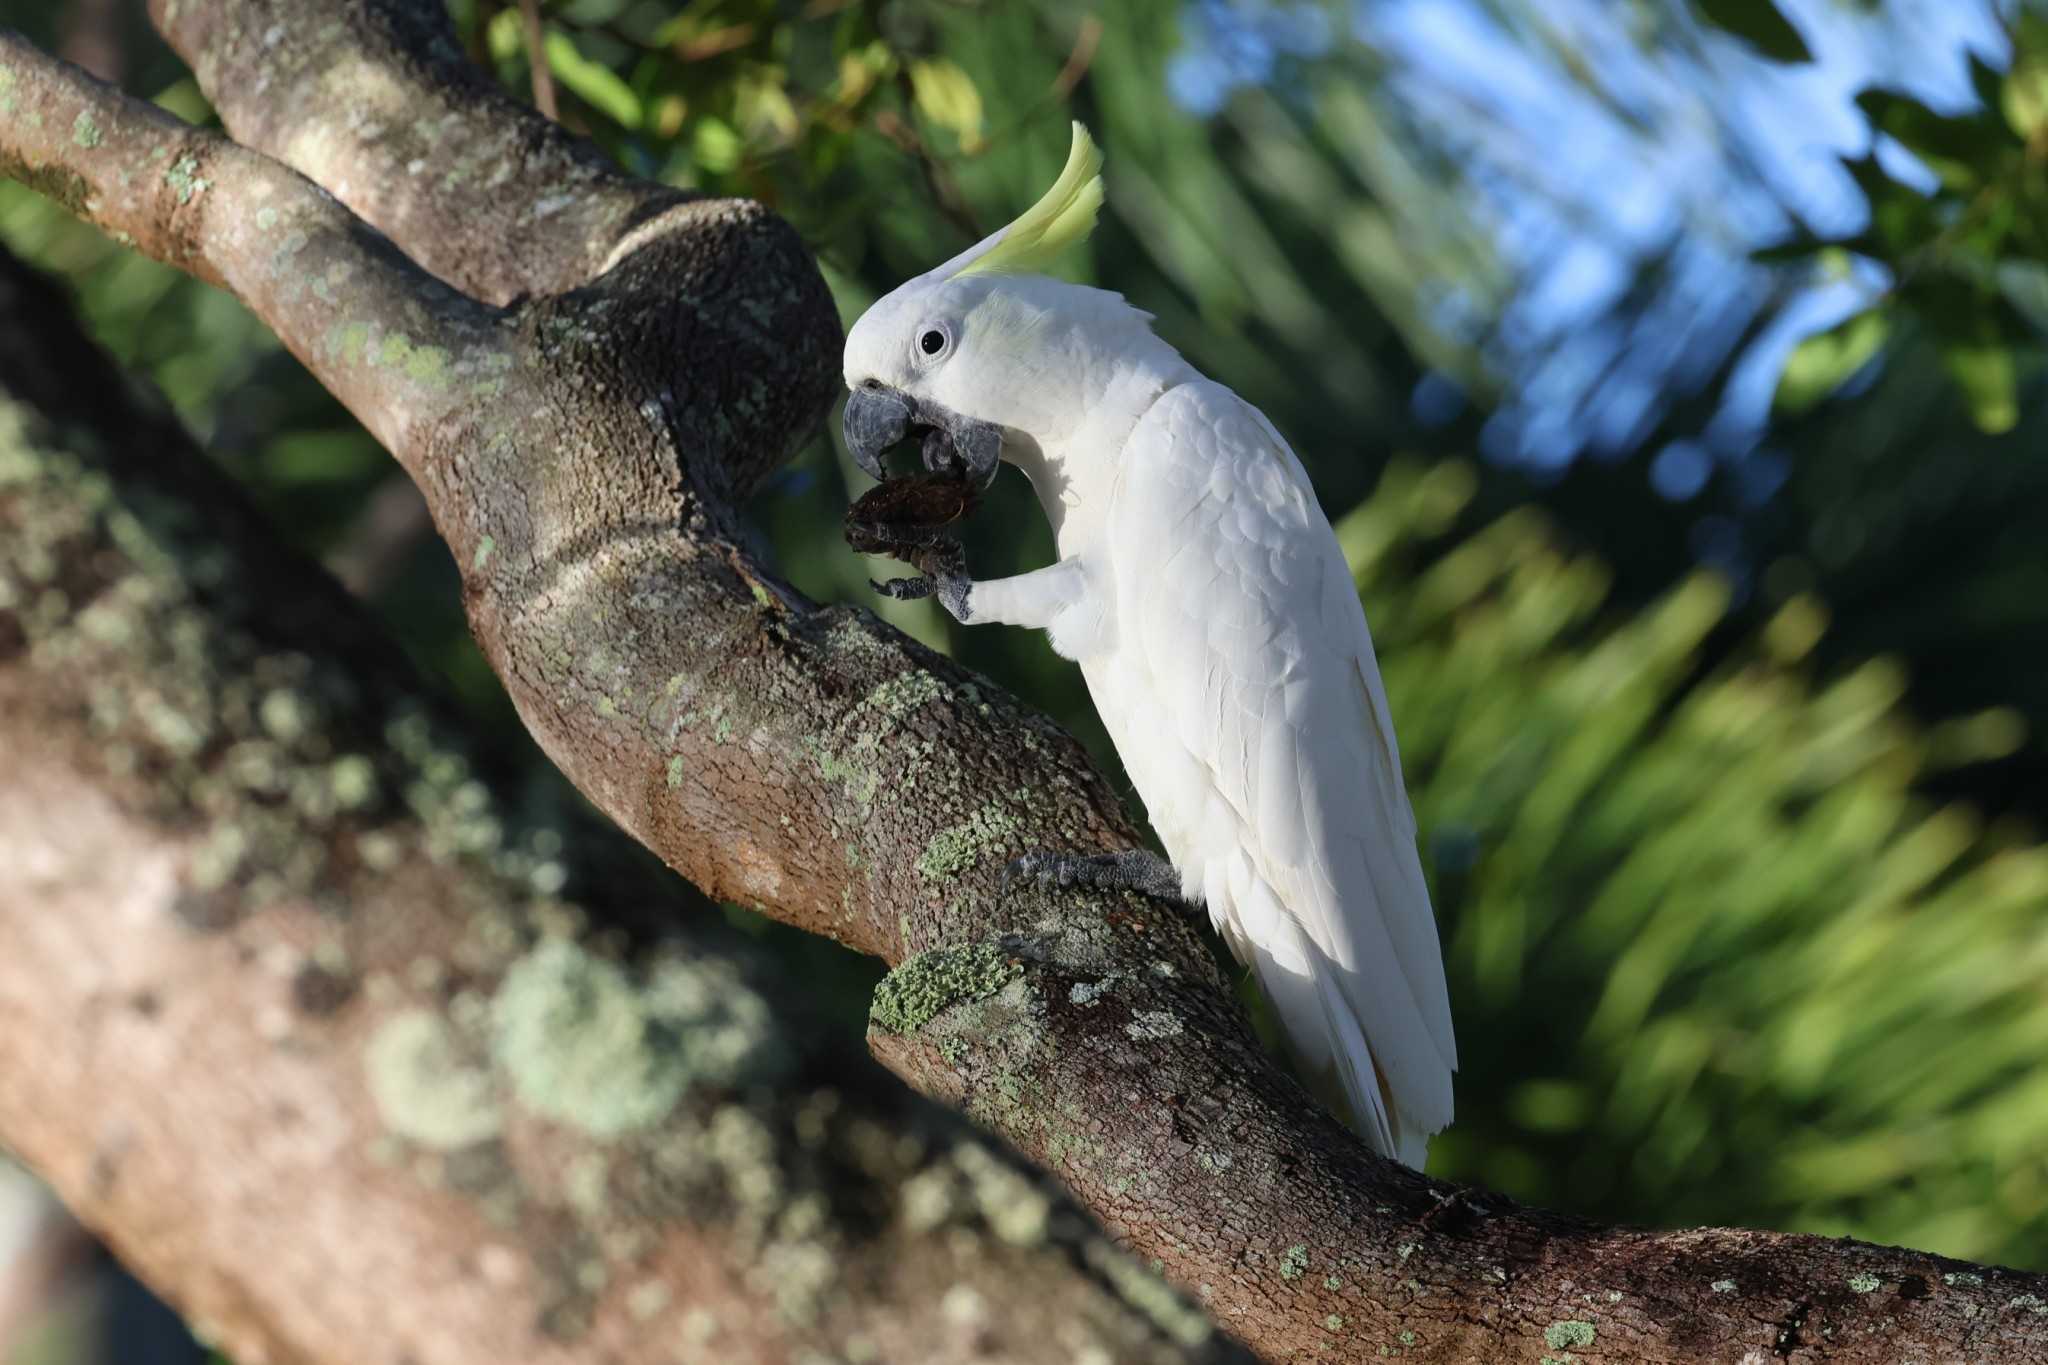 Photo of Sulphur-crested Cockatoo at Esplanade(Cairns) by ぼぼぼ